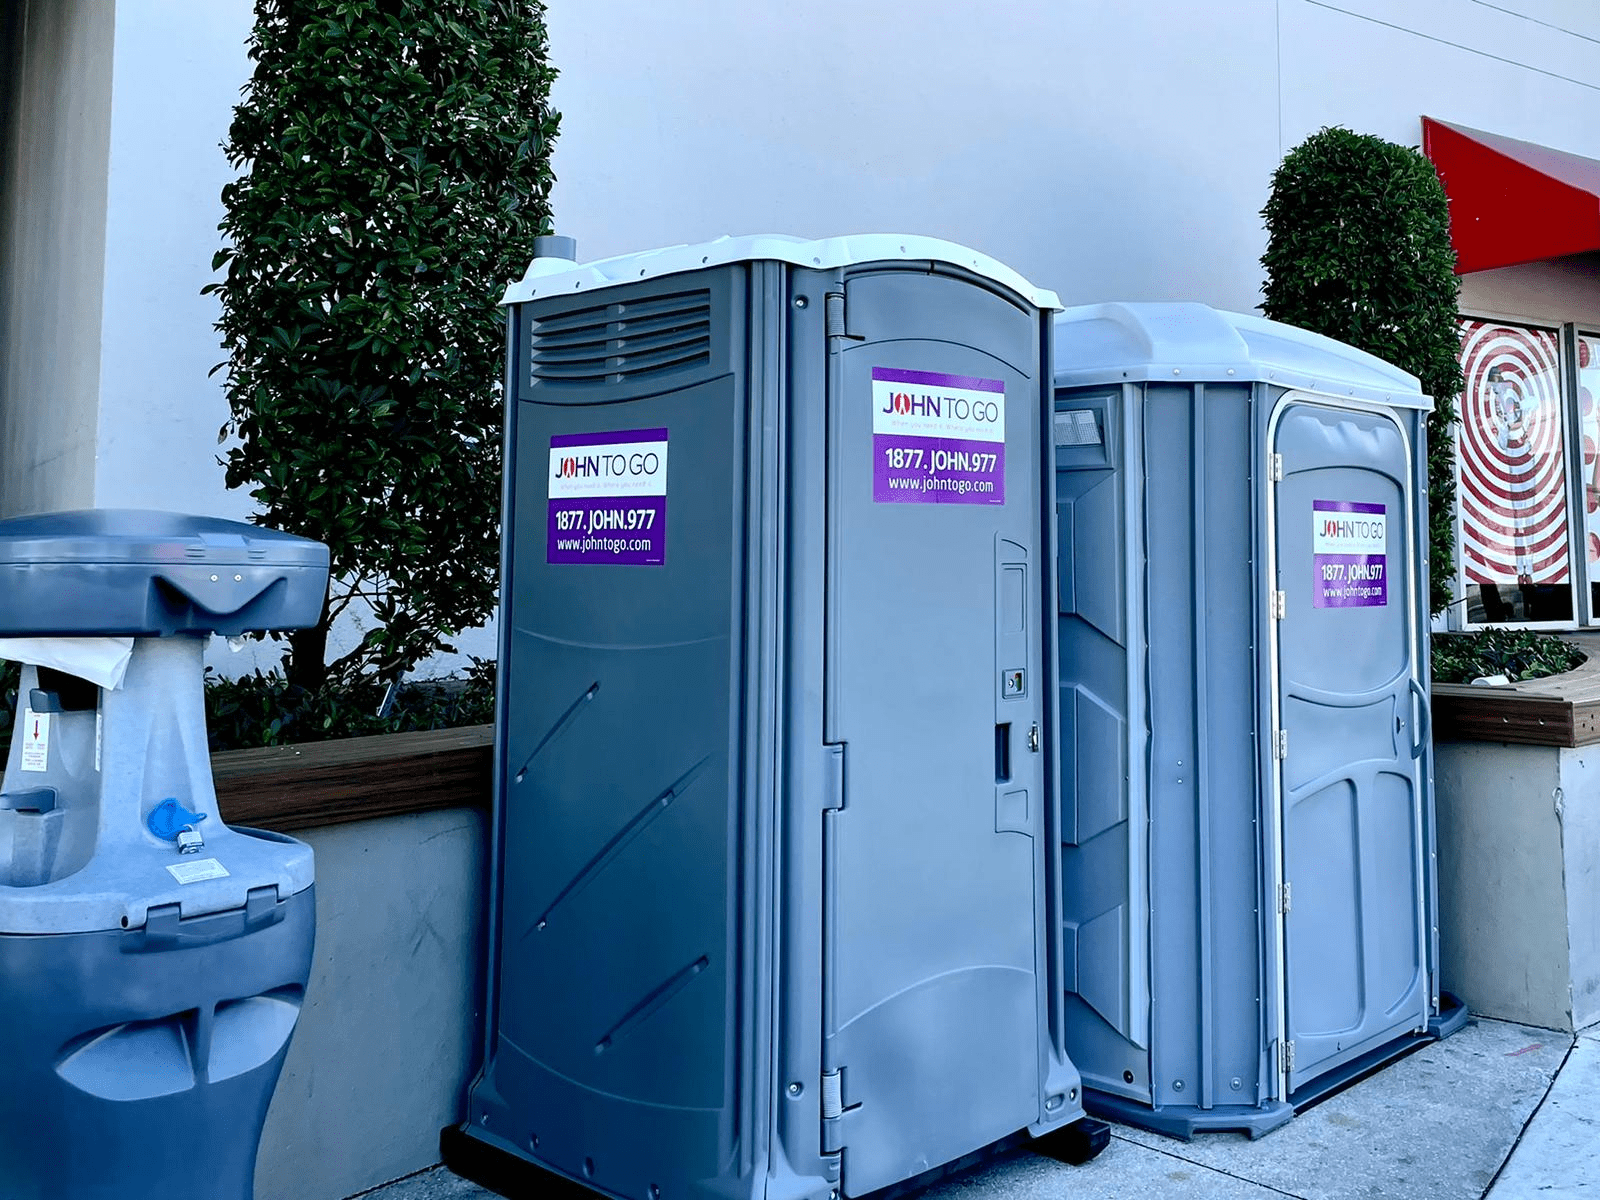 Portable hand washing station with portable toilets at an outdoor event